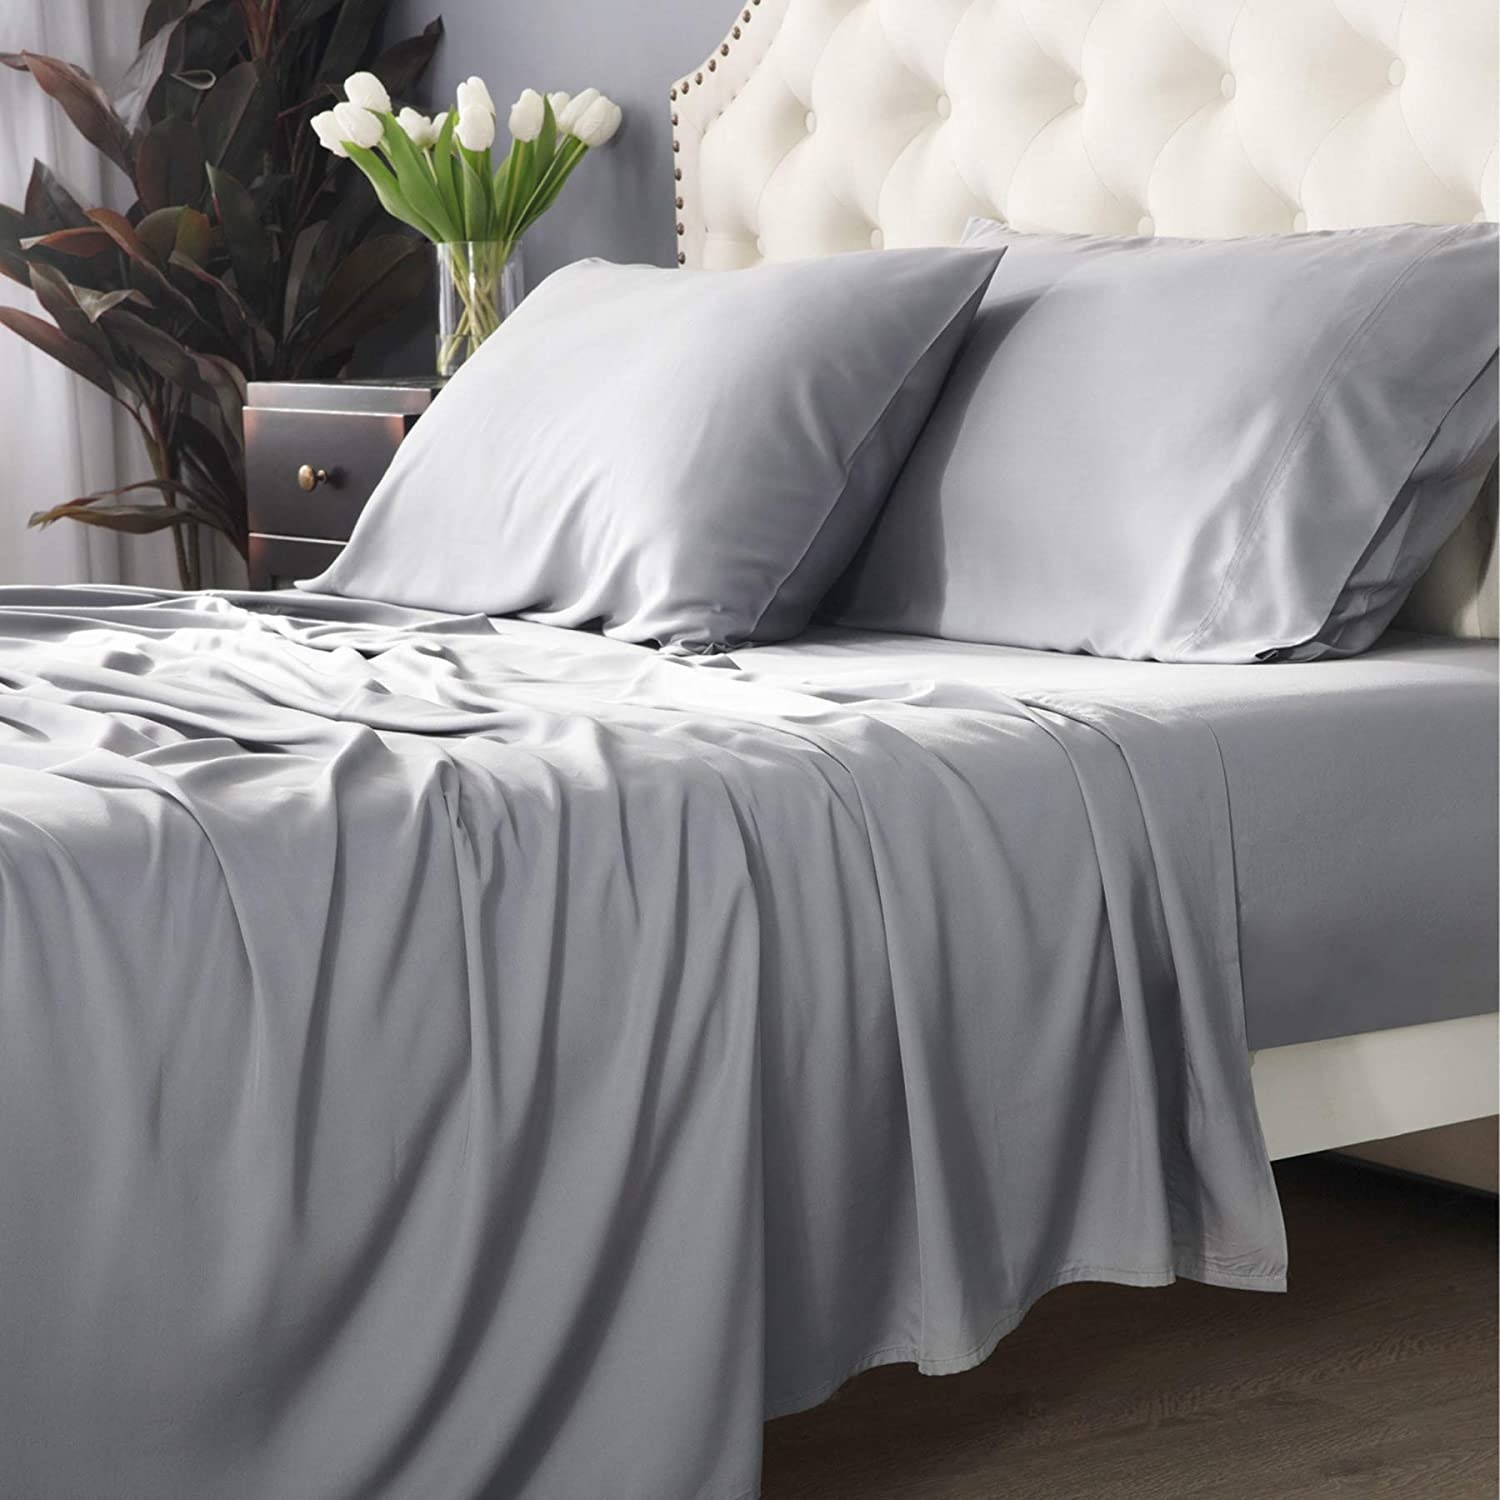 The grey set of sheets